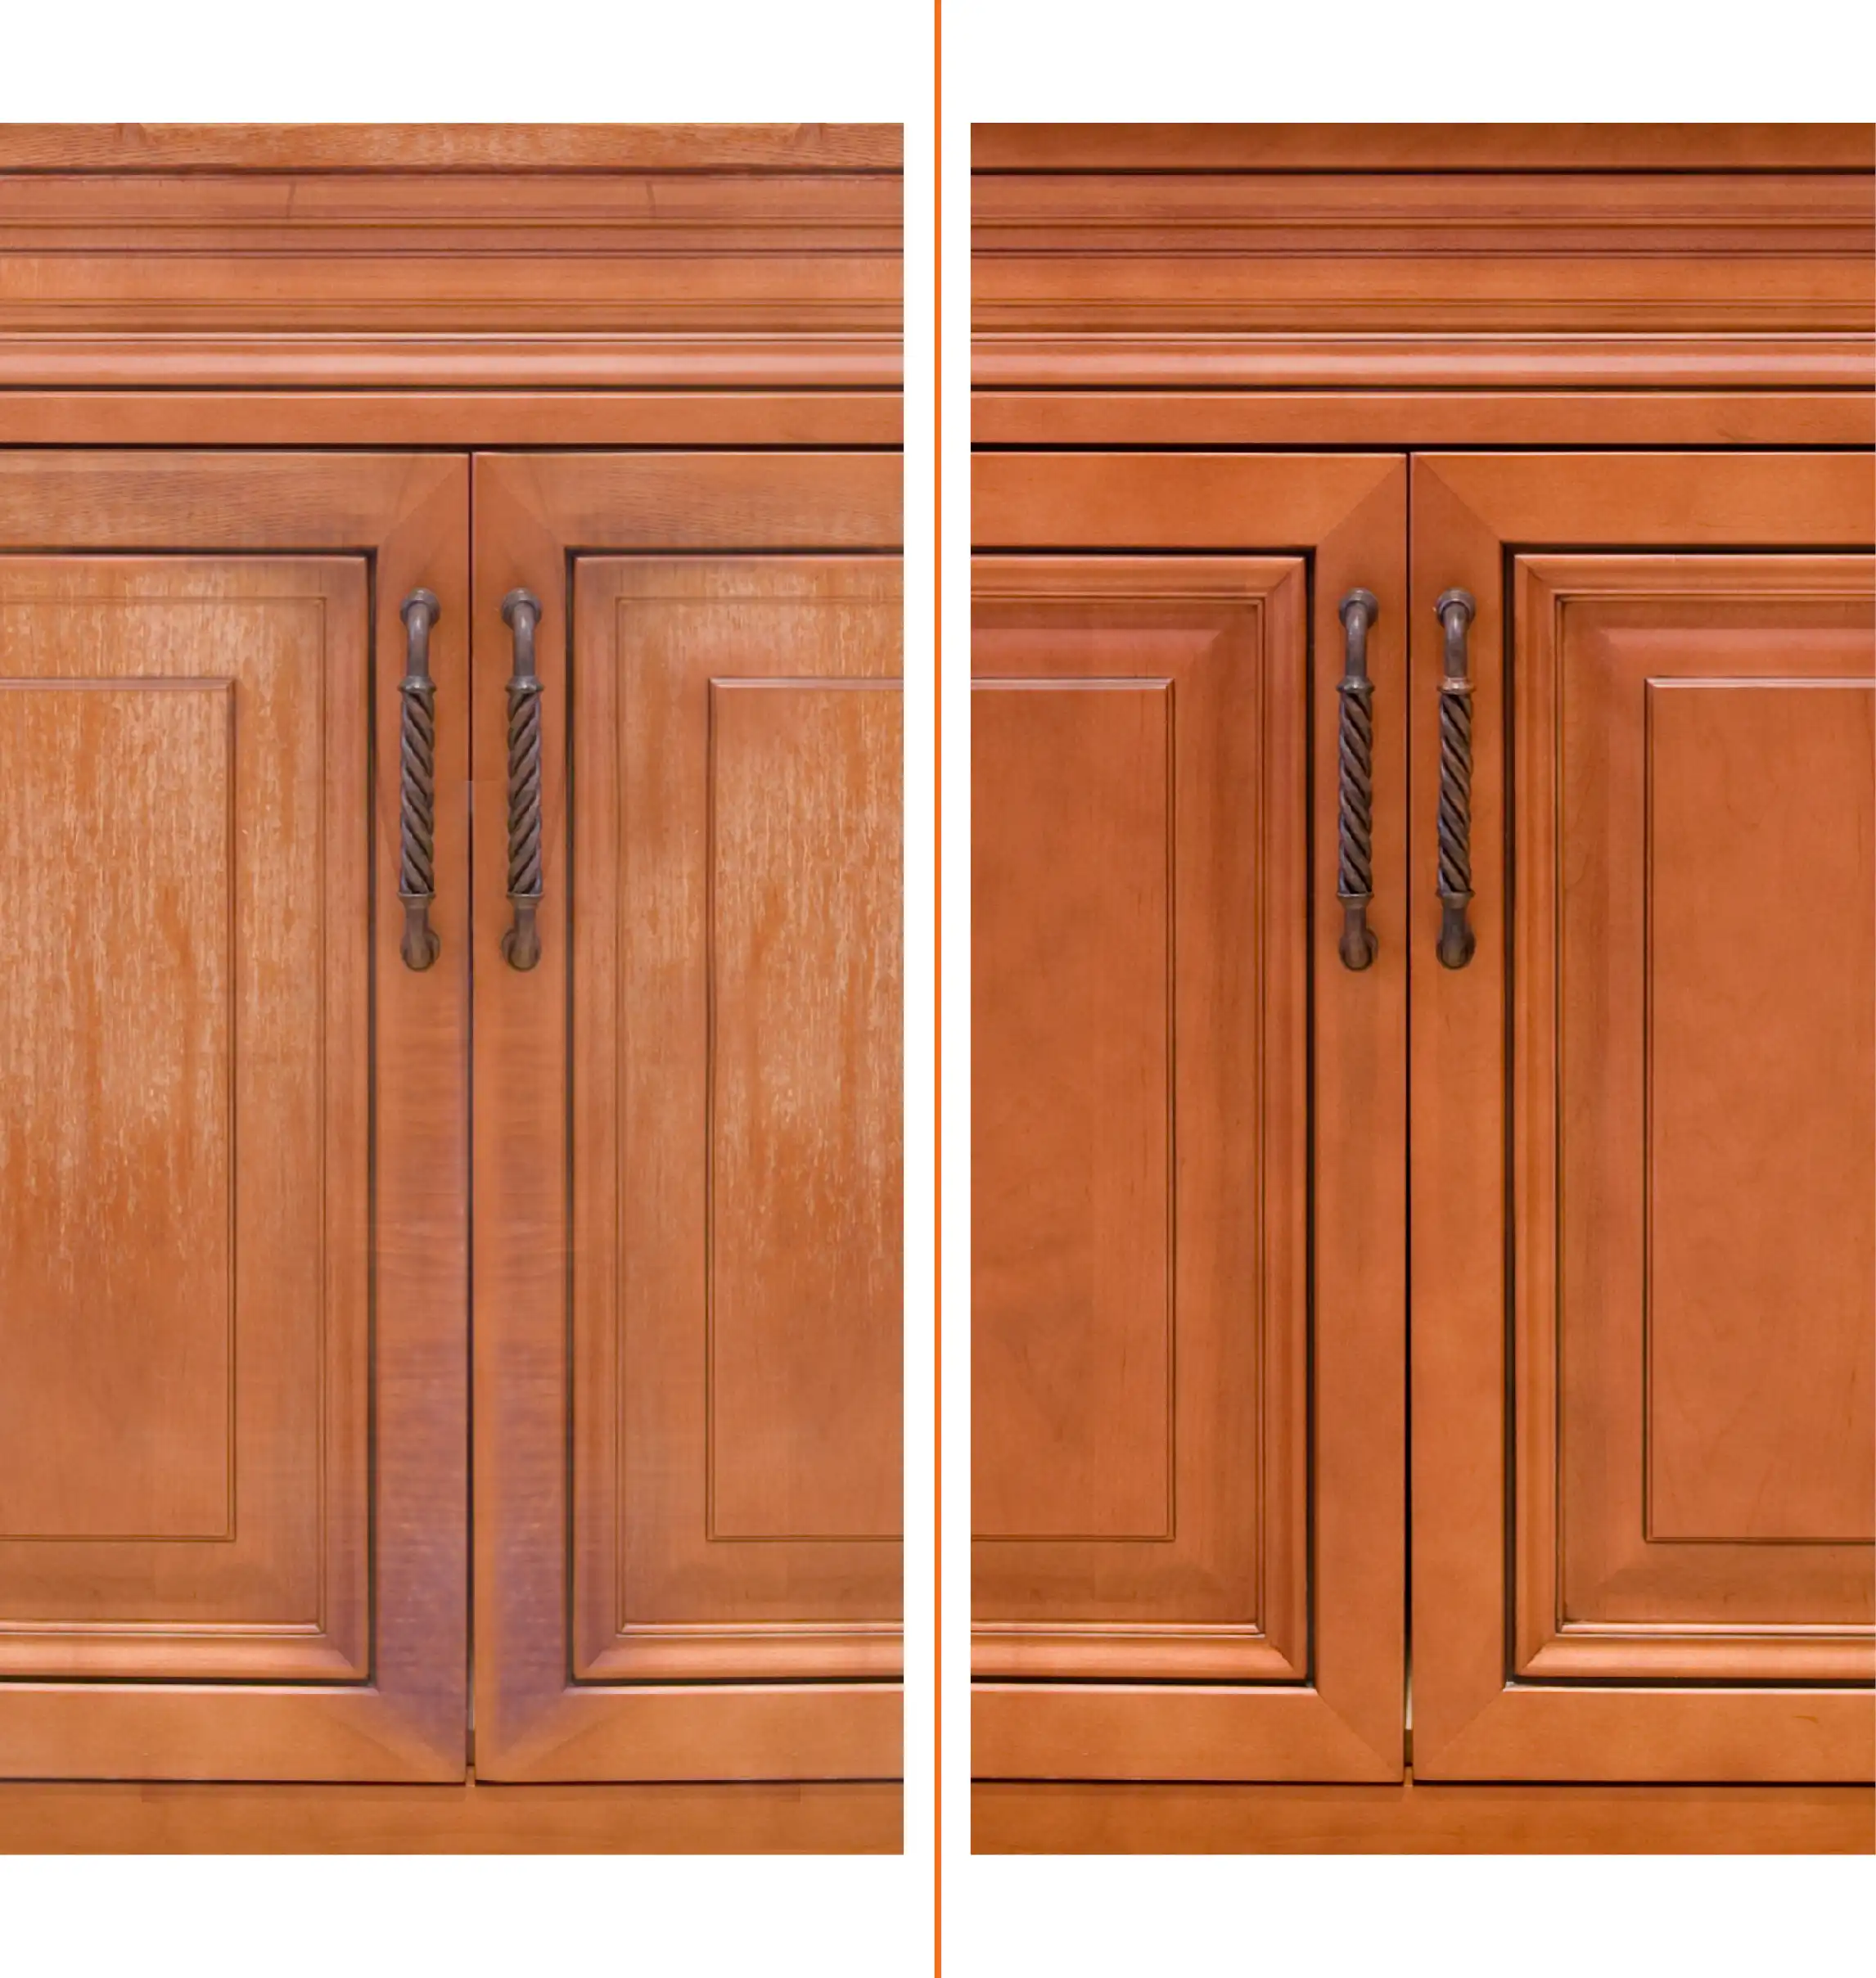 Cabinet Refinishing Services